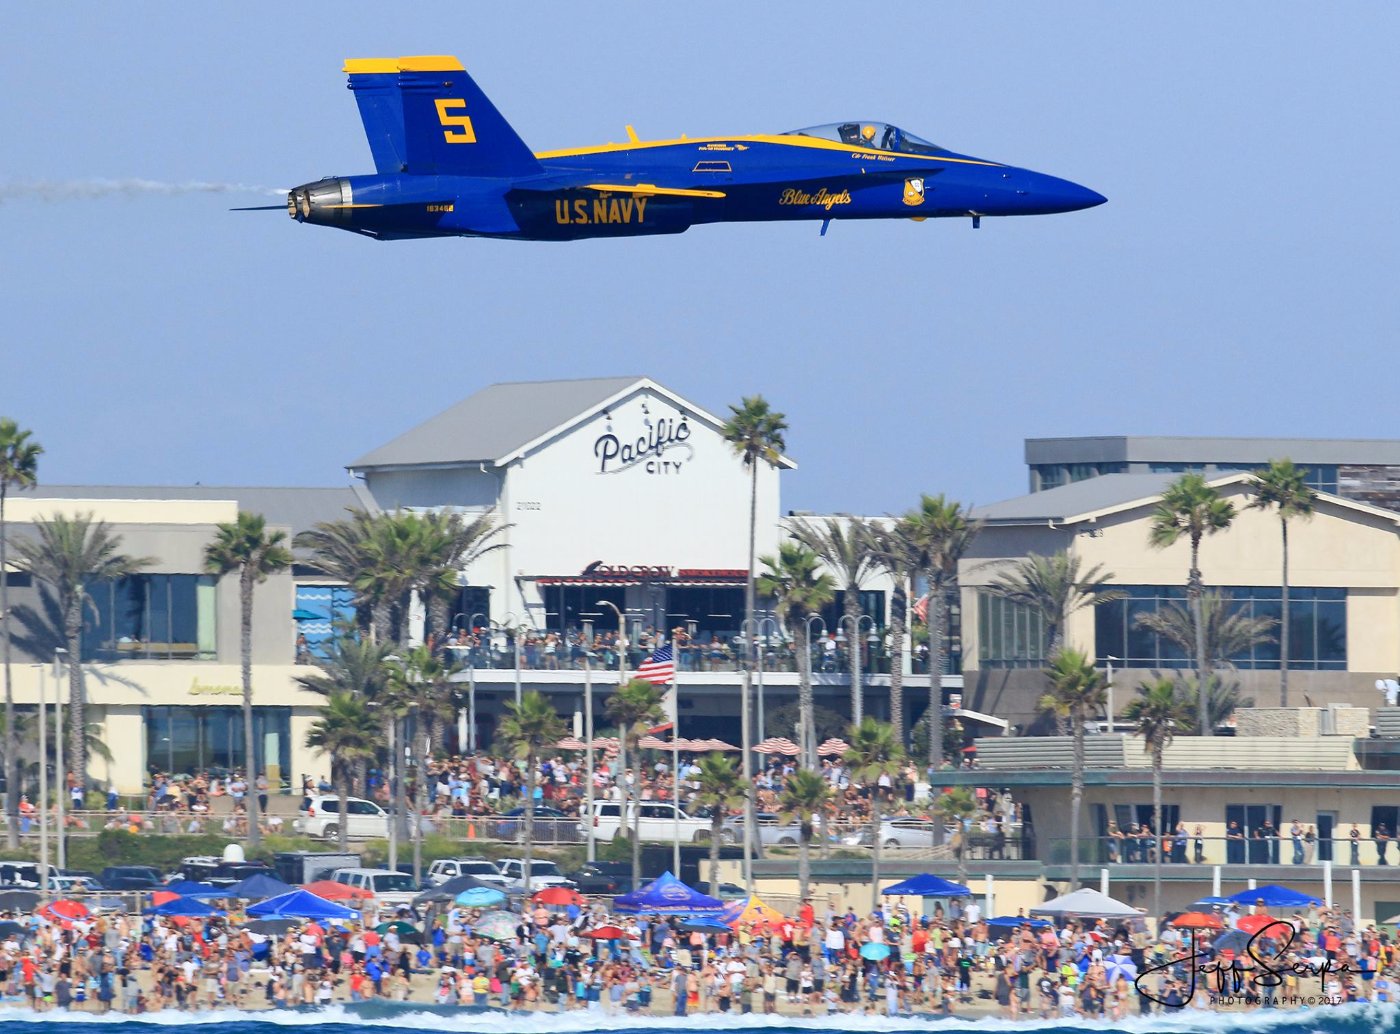 Blue Angel #5, Commander Frank Weisser on a high speed pass over The Huntington Beach Airshow